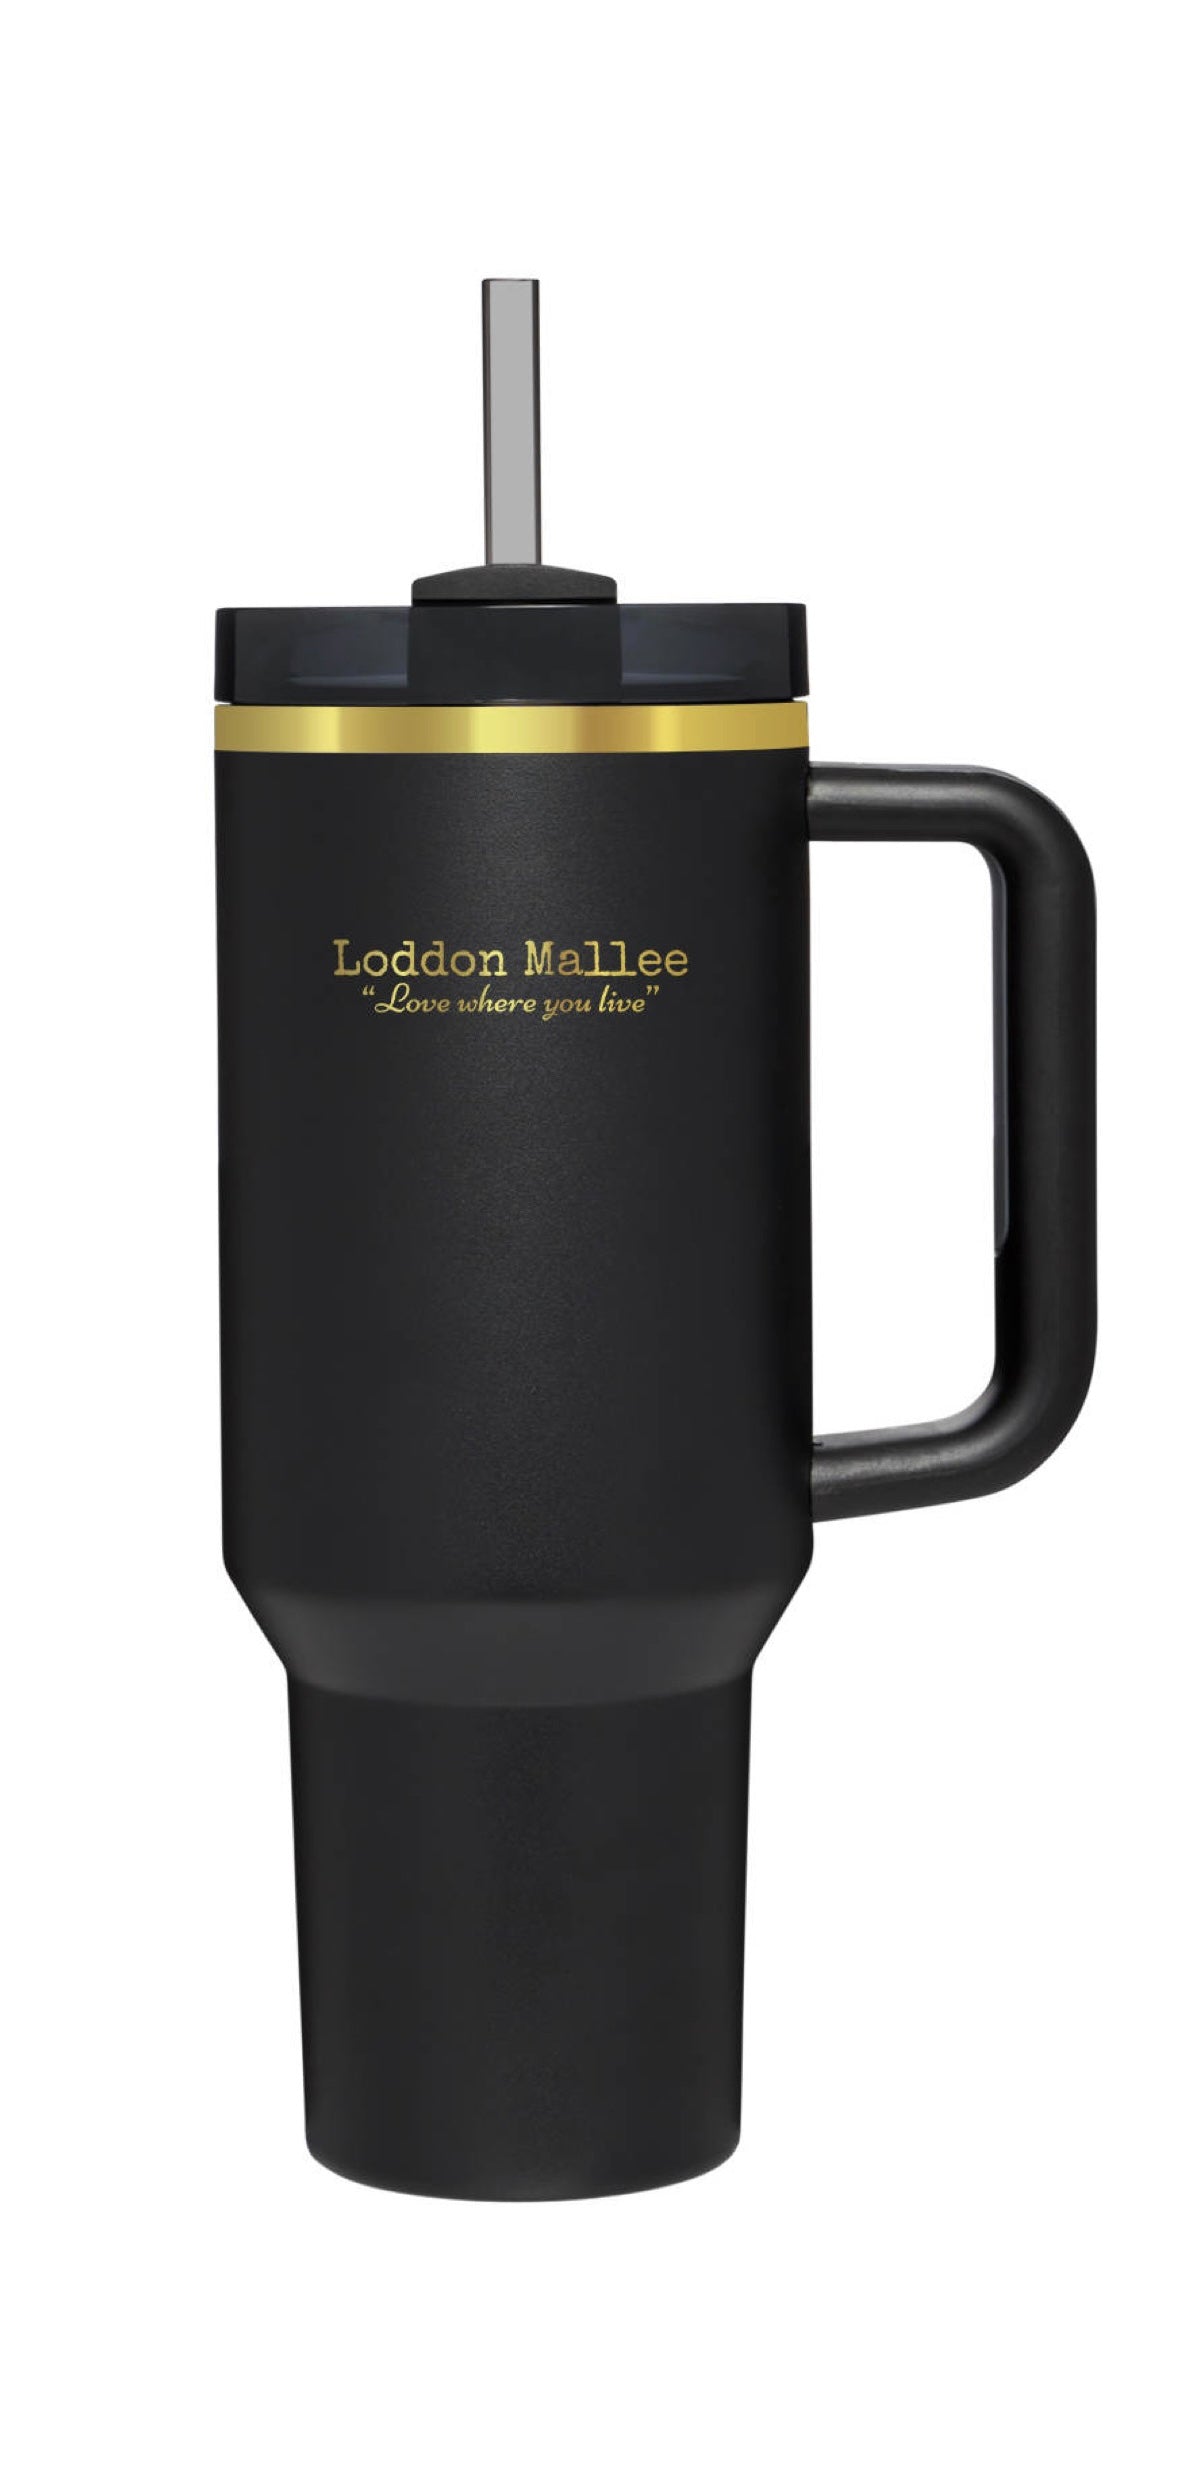 Stainless Steel Loddon Mallee 2.0 Travel Cup 40oz